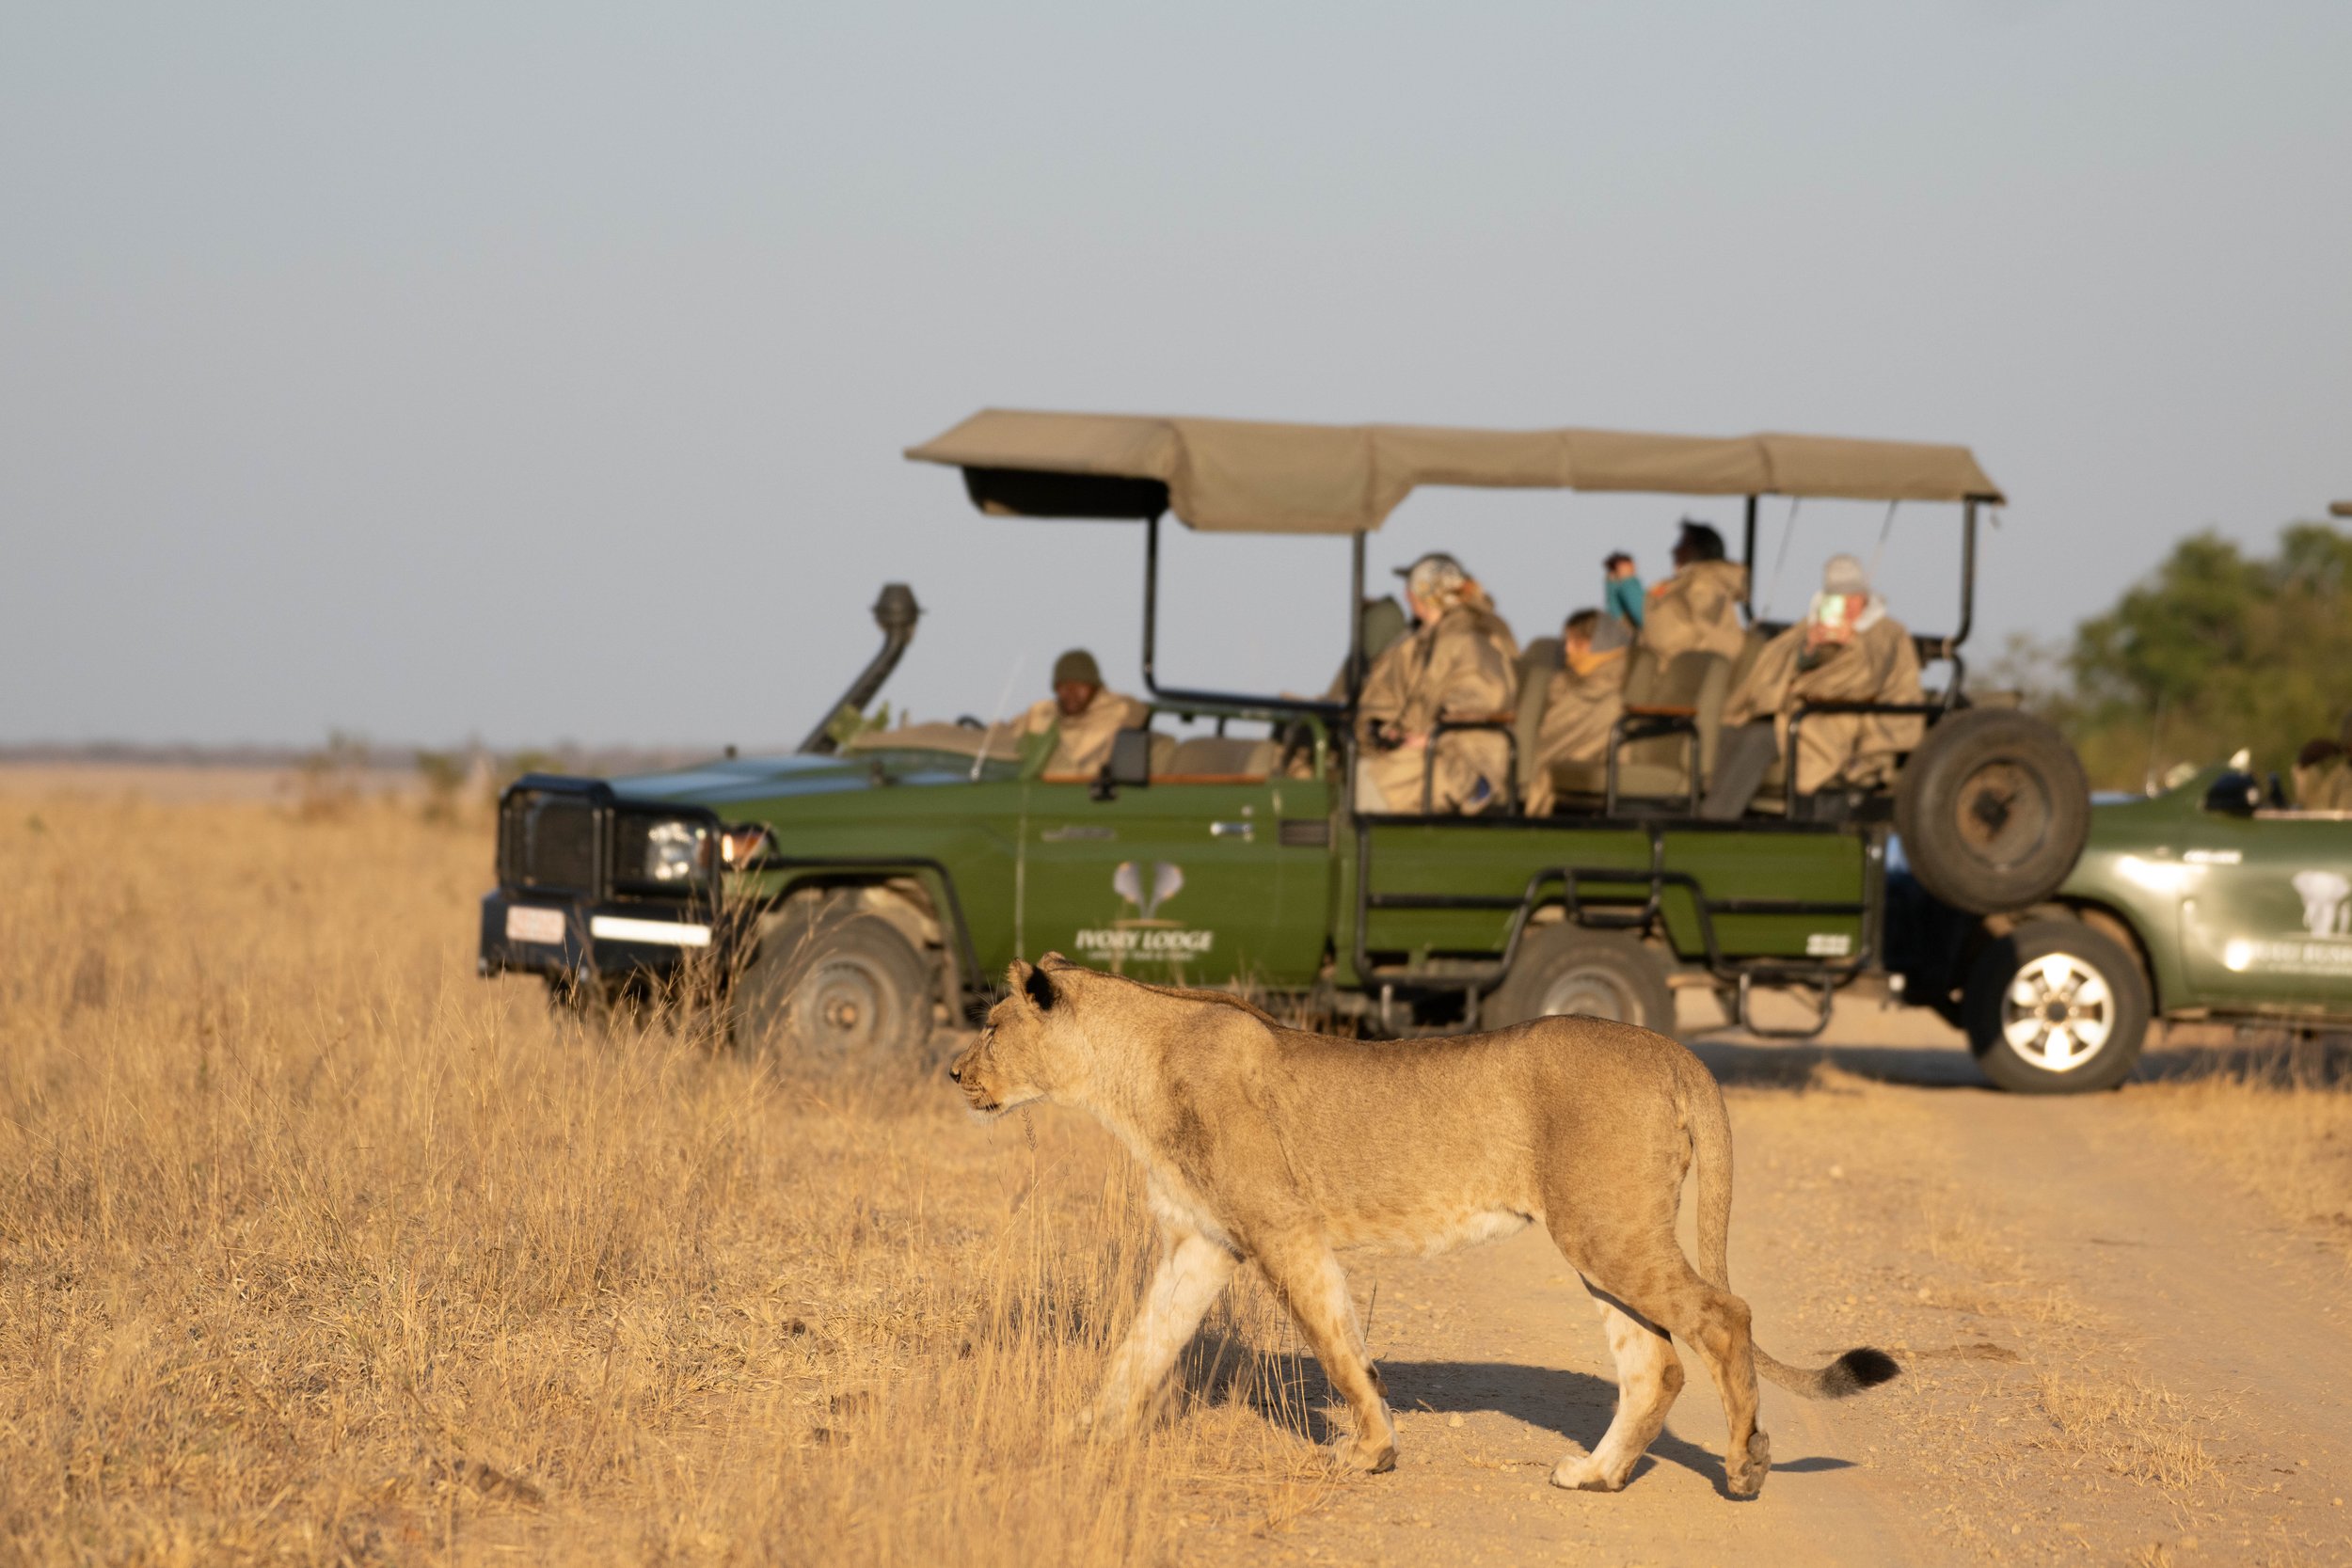 A lion strolls in front of a vehicle carrying people.